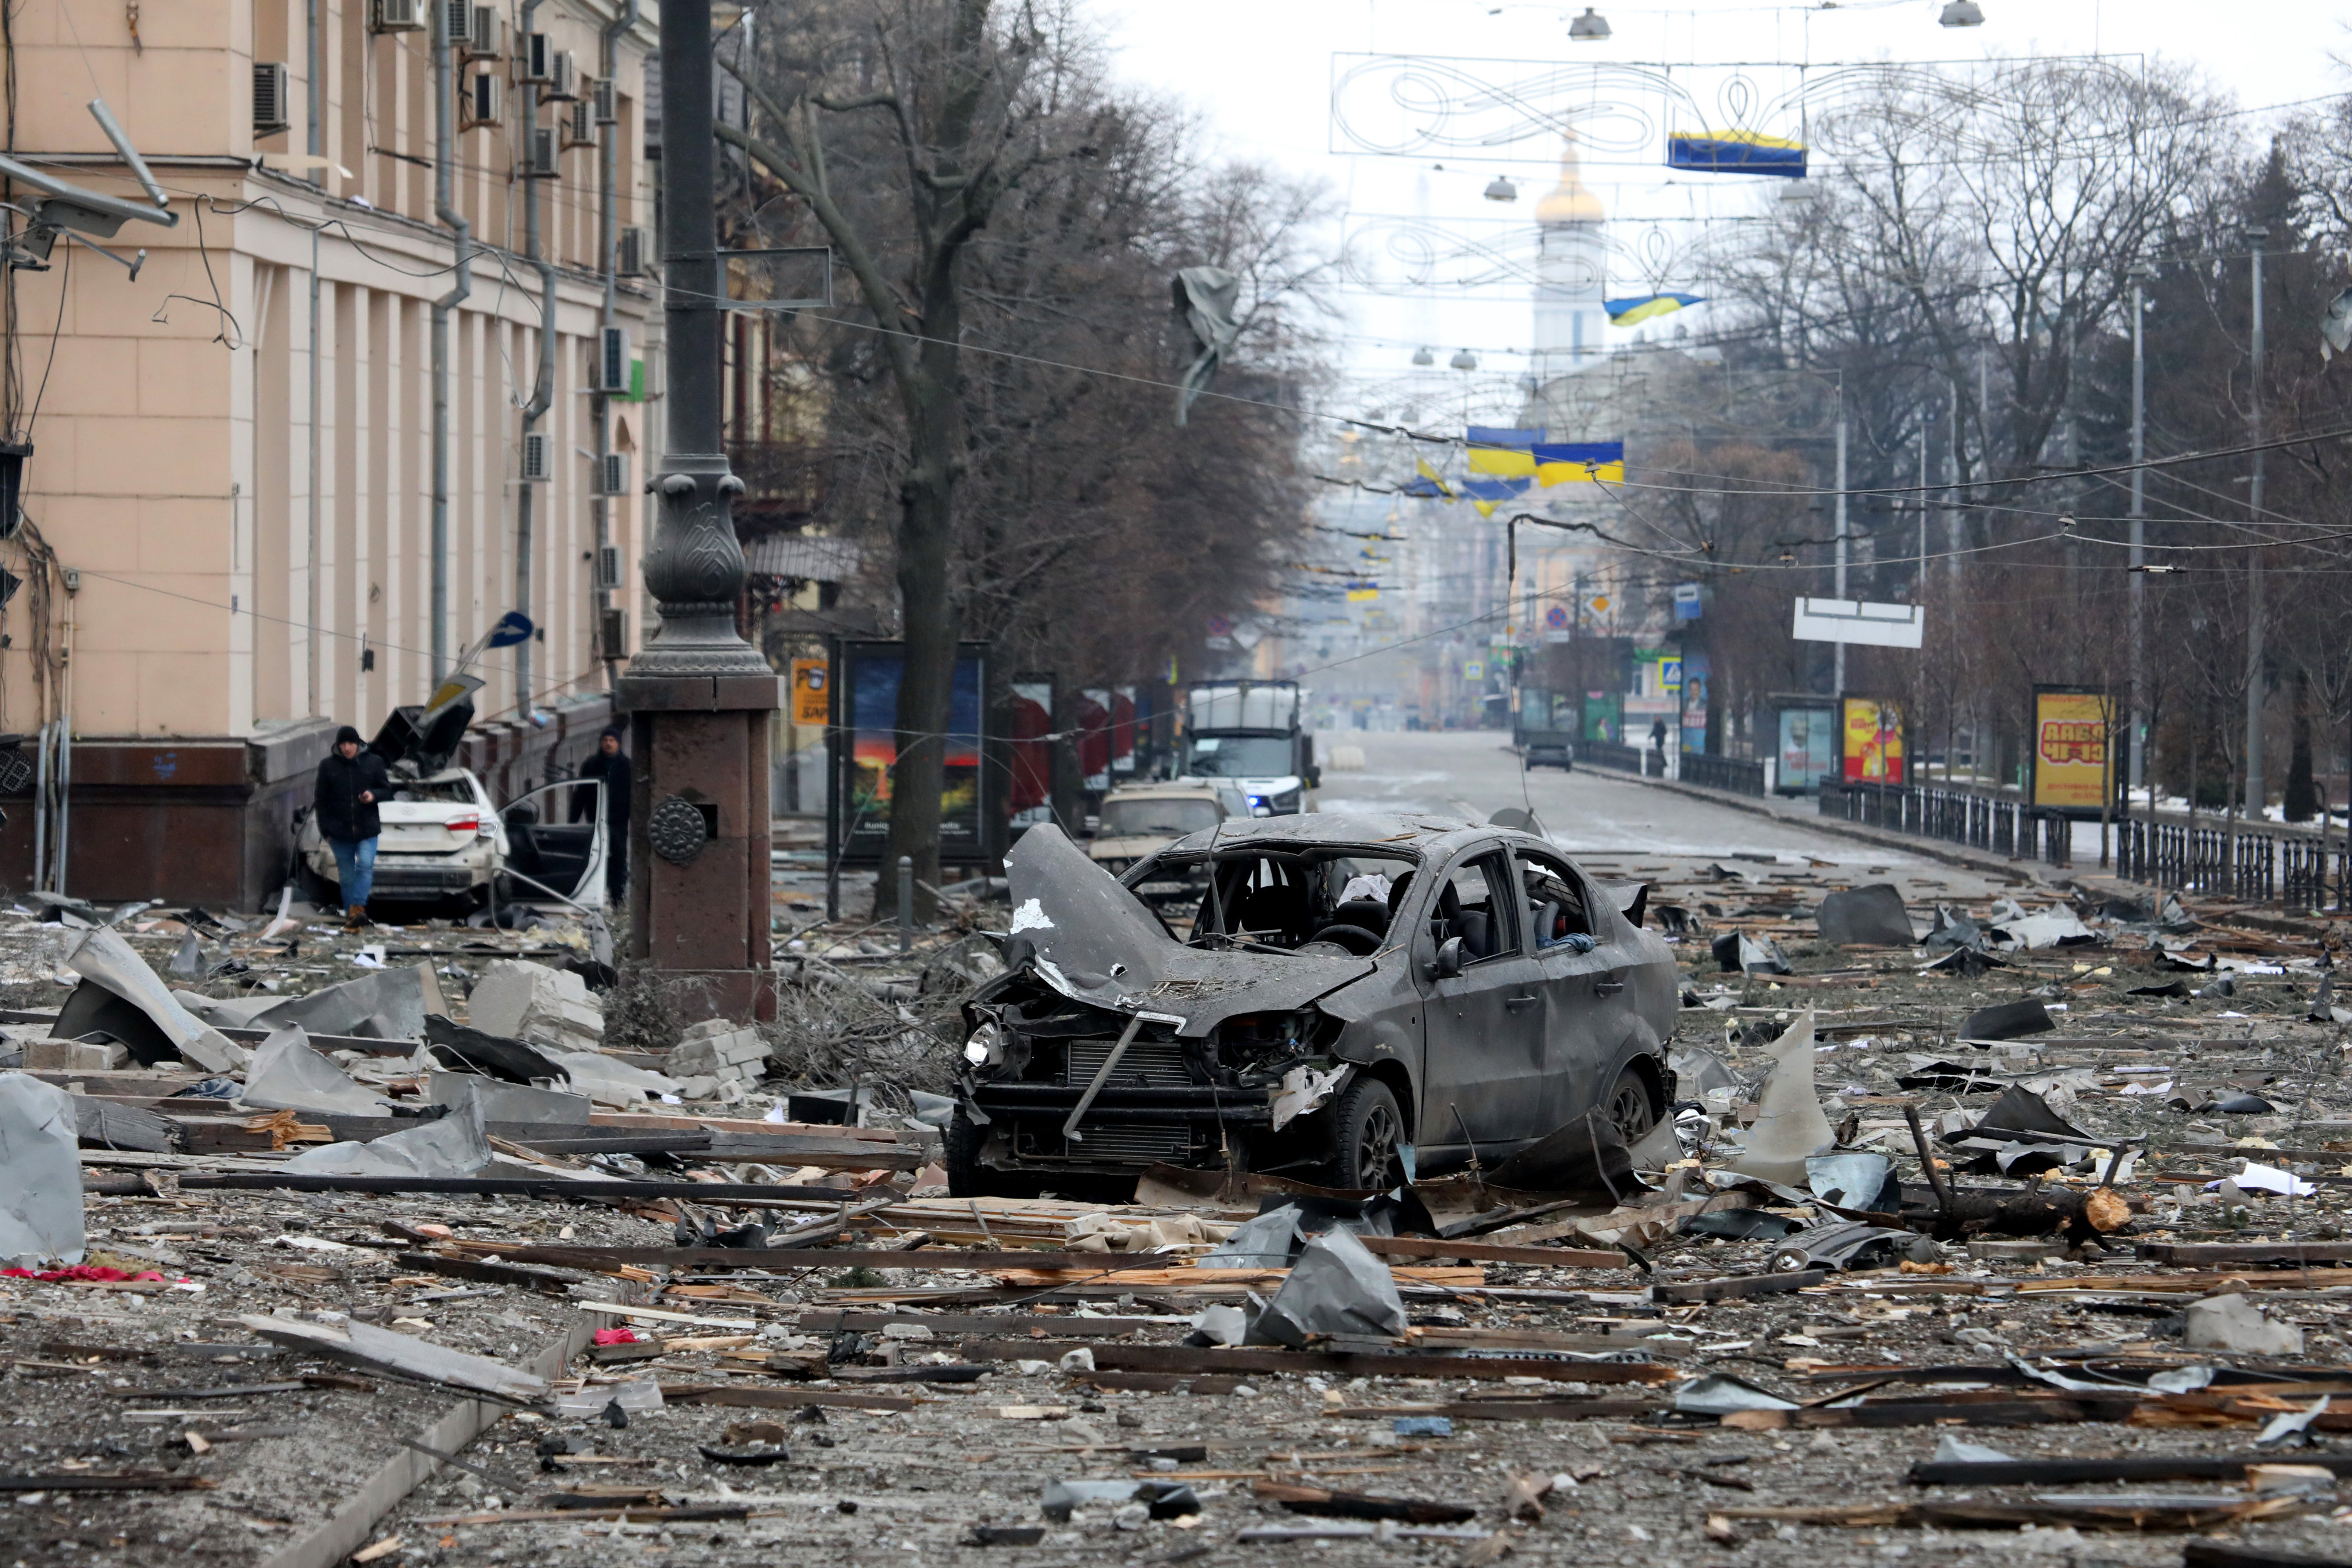 A burnt-out car sits in the street in Kharkiv, Ukraine, after shelling by Russian troops on March 1. Photo: DPA